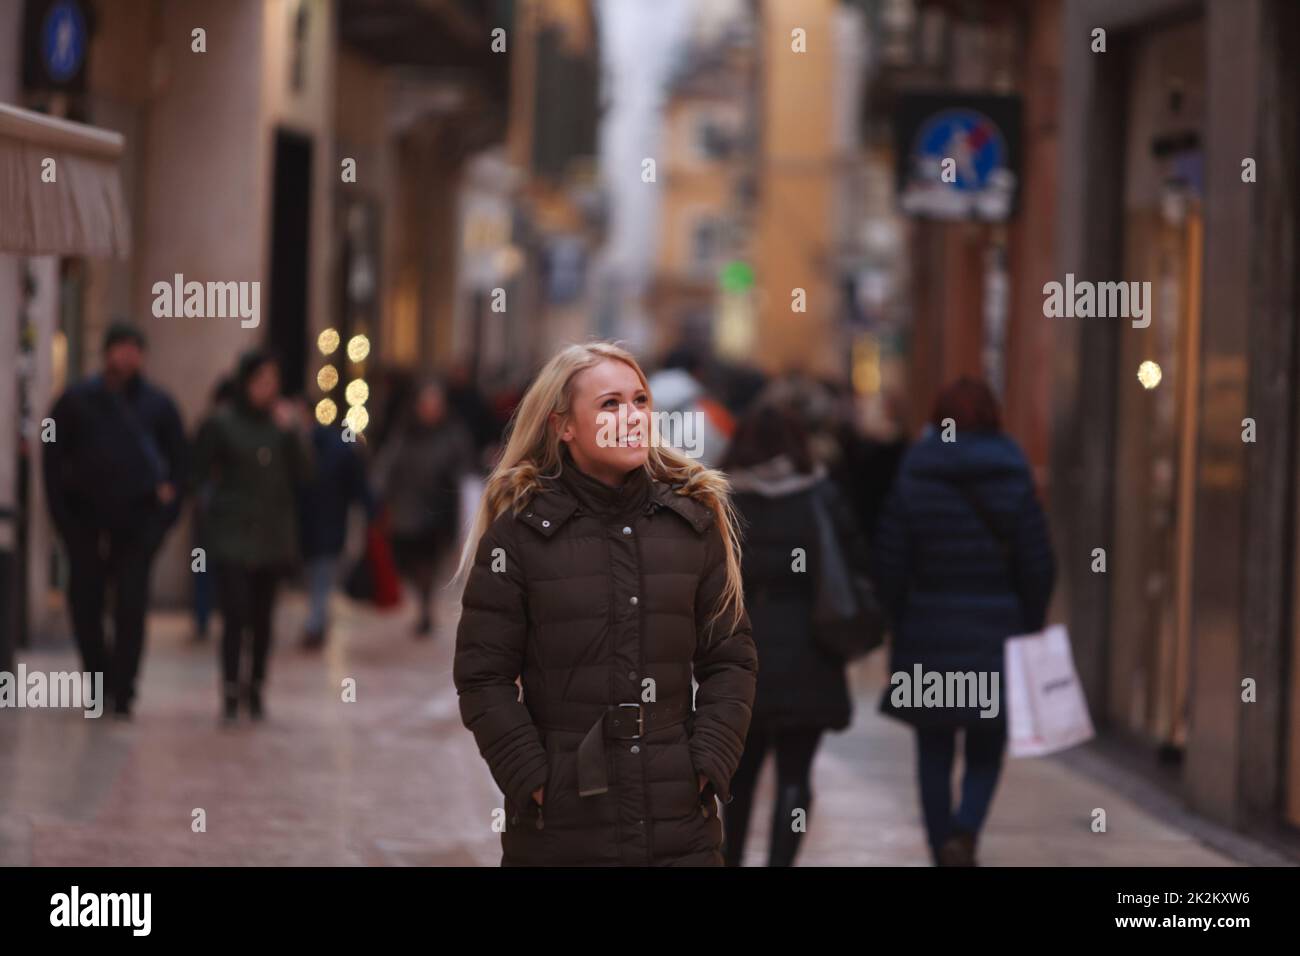 Happy natural young woman strolling down an urban street Stock Photo